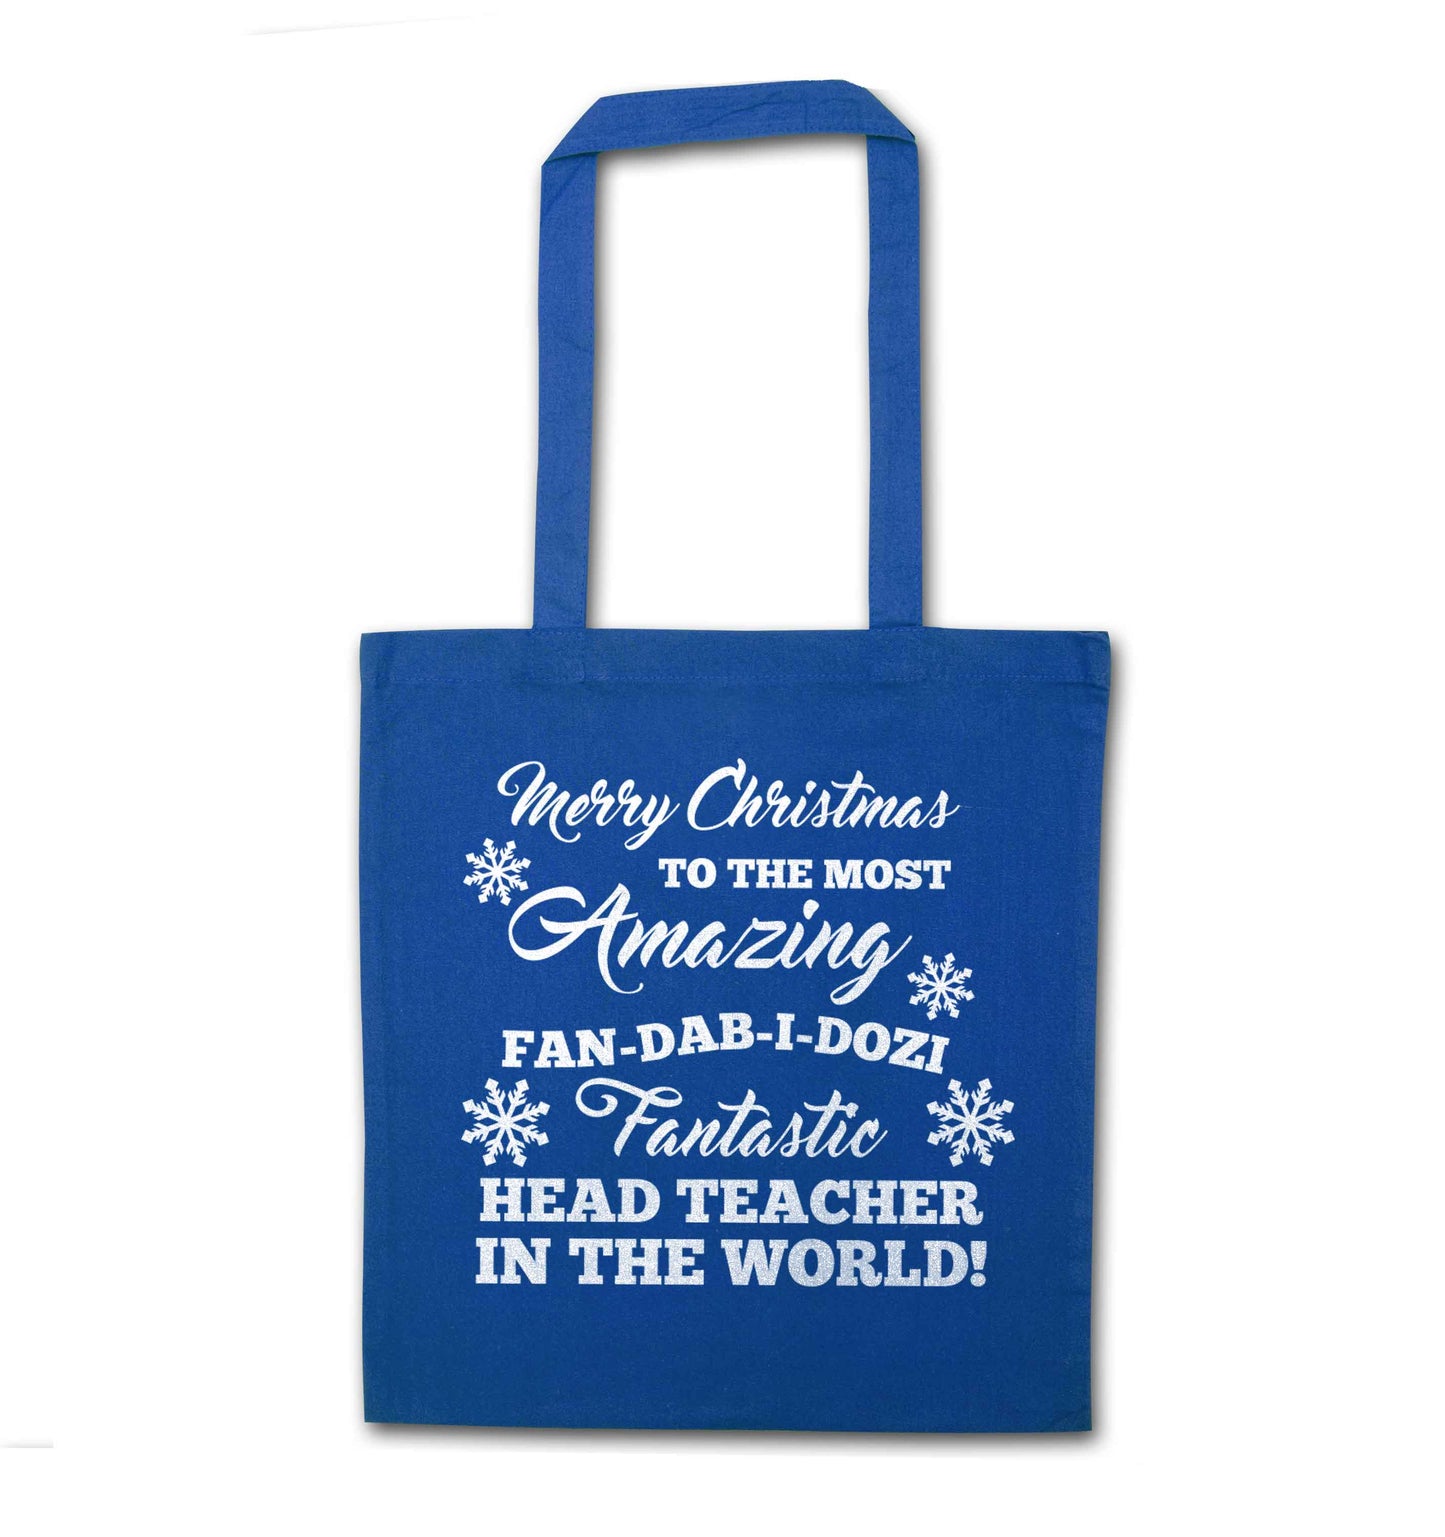 Merry Christmas to the most amazing fan-dab-i-dozi fantasic head teacher in the world blue tote bag